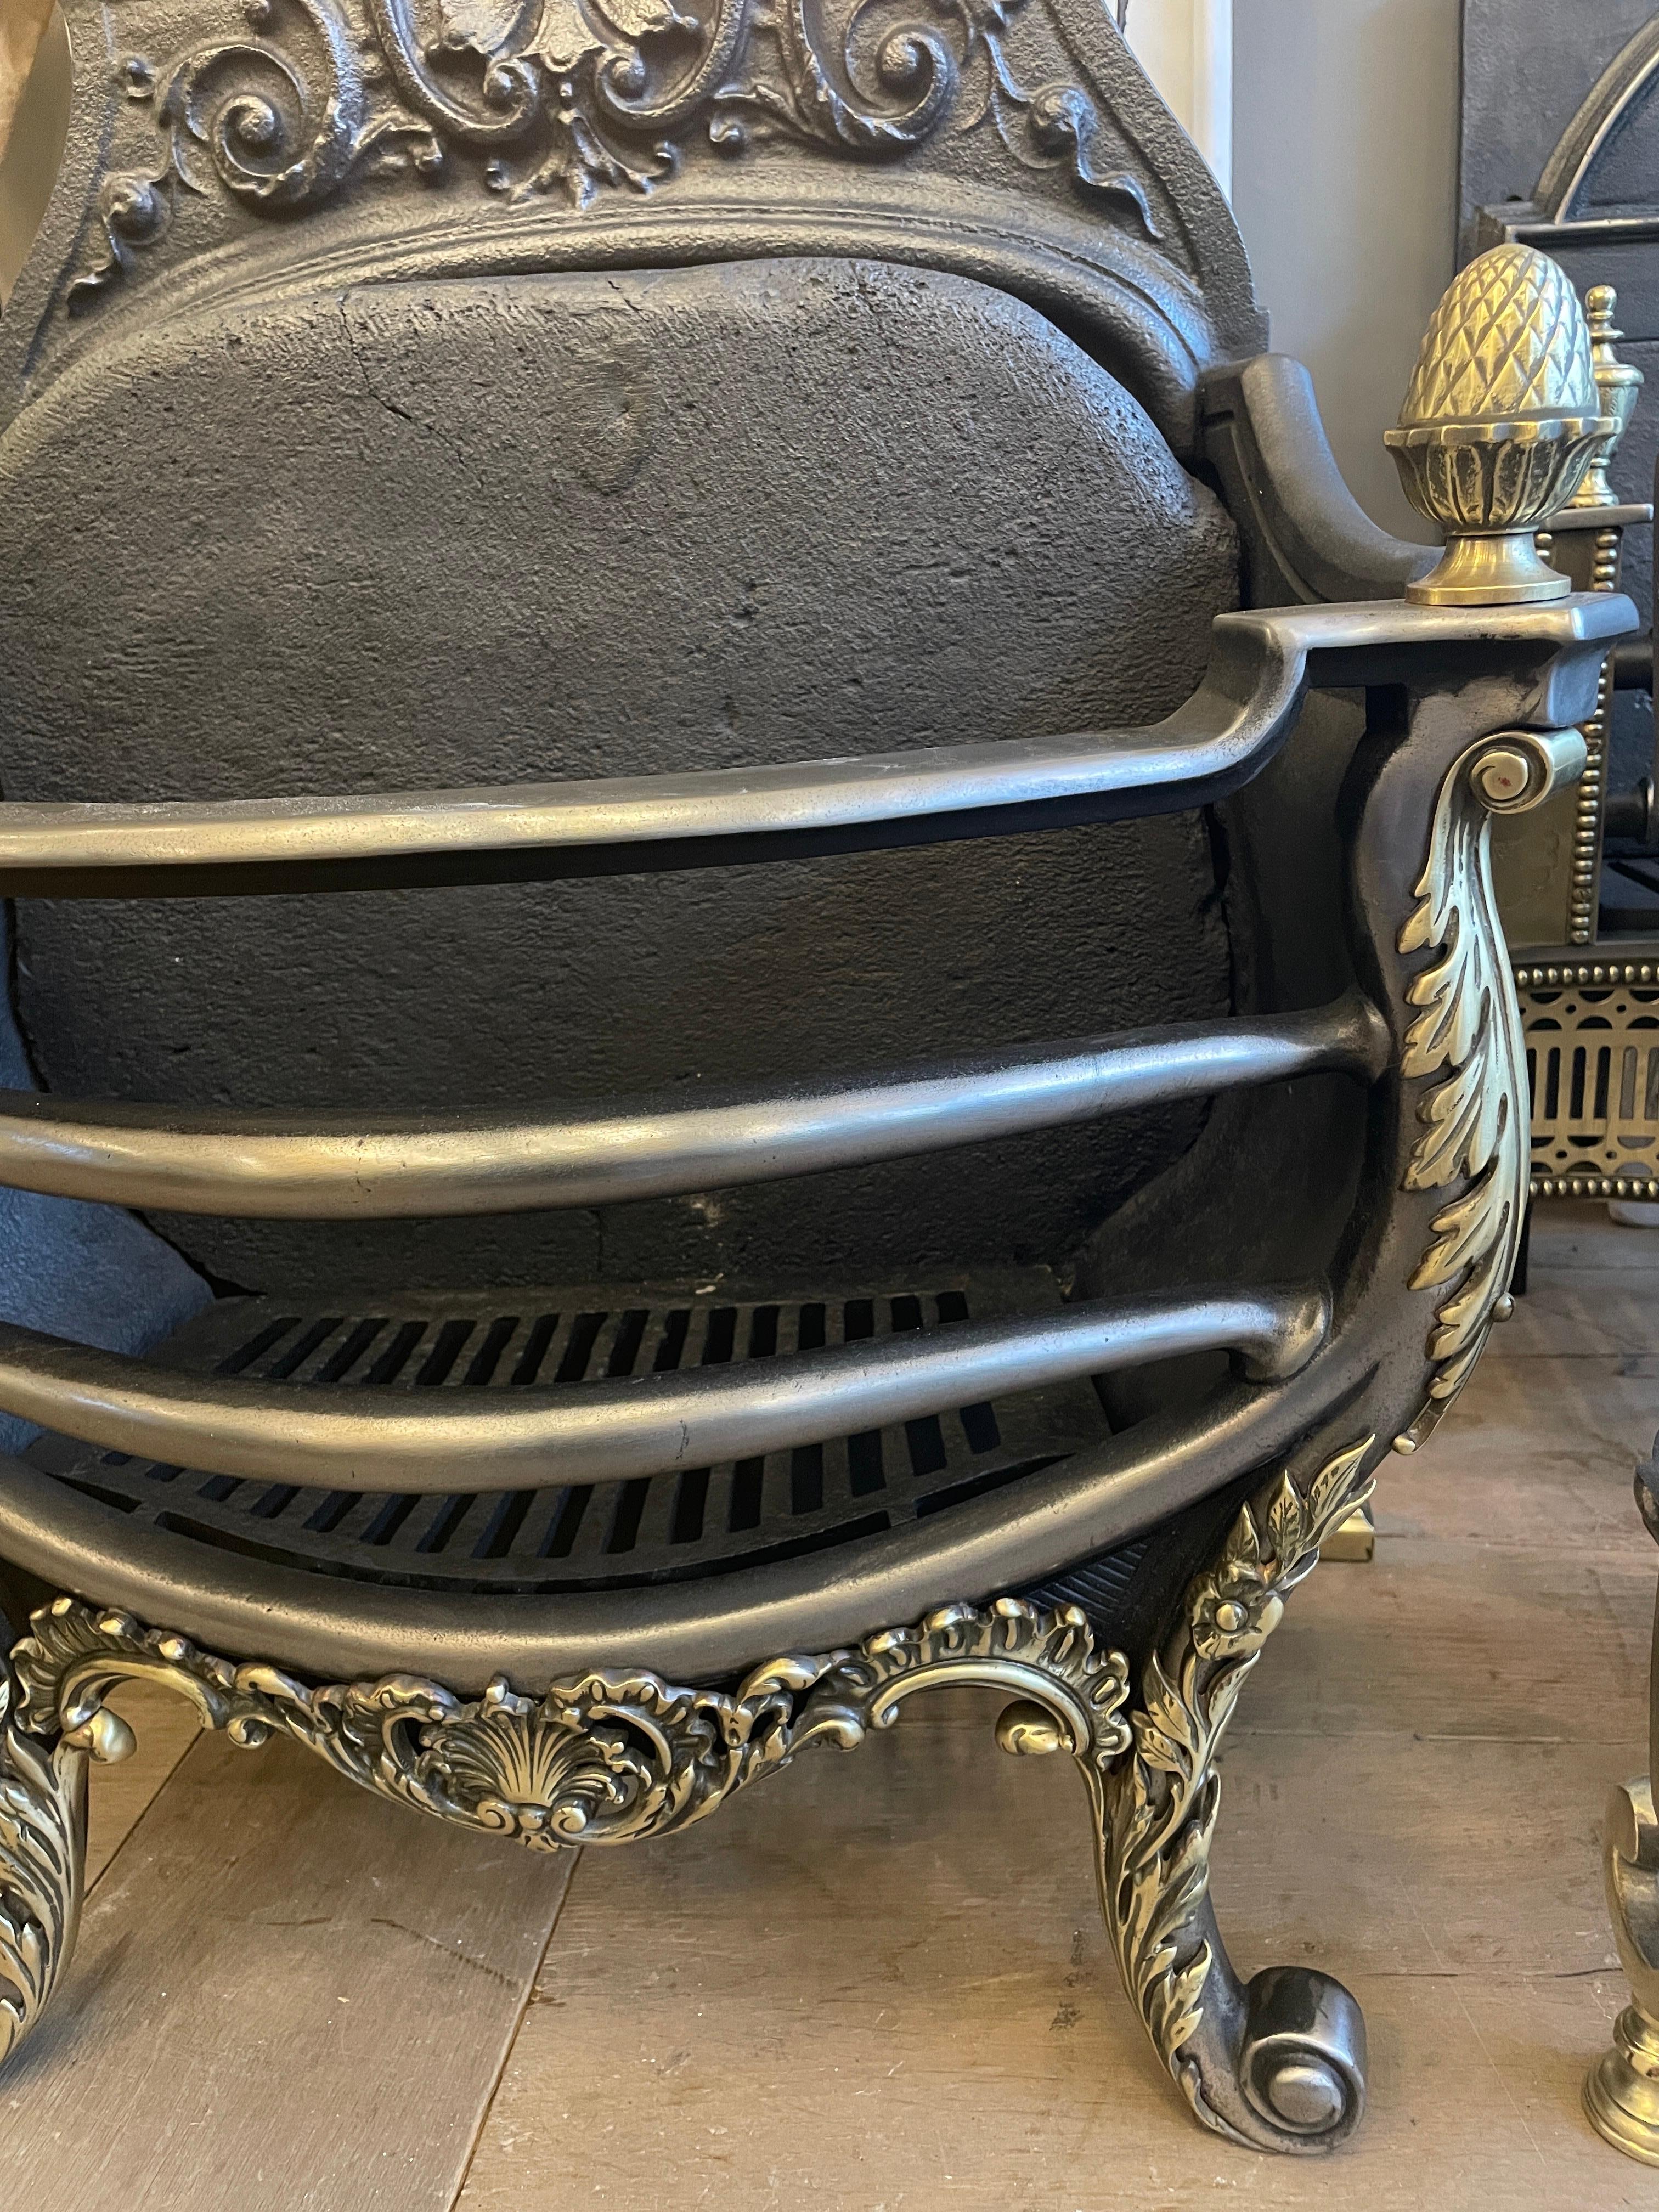 A large English late 19th century Rococo style fire basket in brass and cast iron. Dated on back plate, with a very decorative pediment in the Rococo taste, with a large shaped fire brick within. The polished bowed bars of the burning area